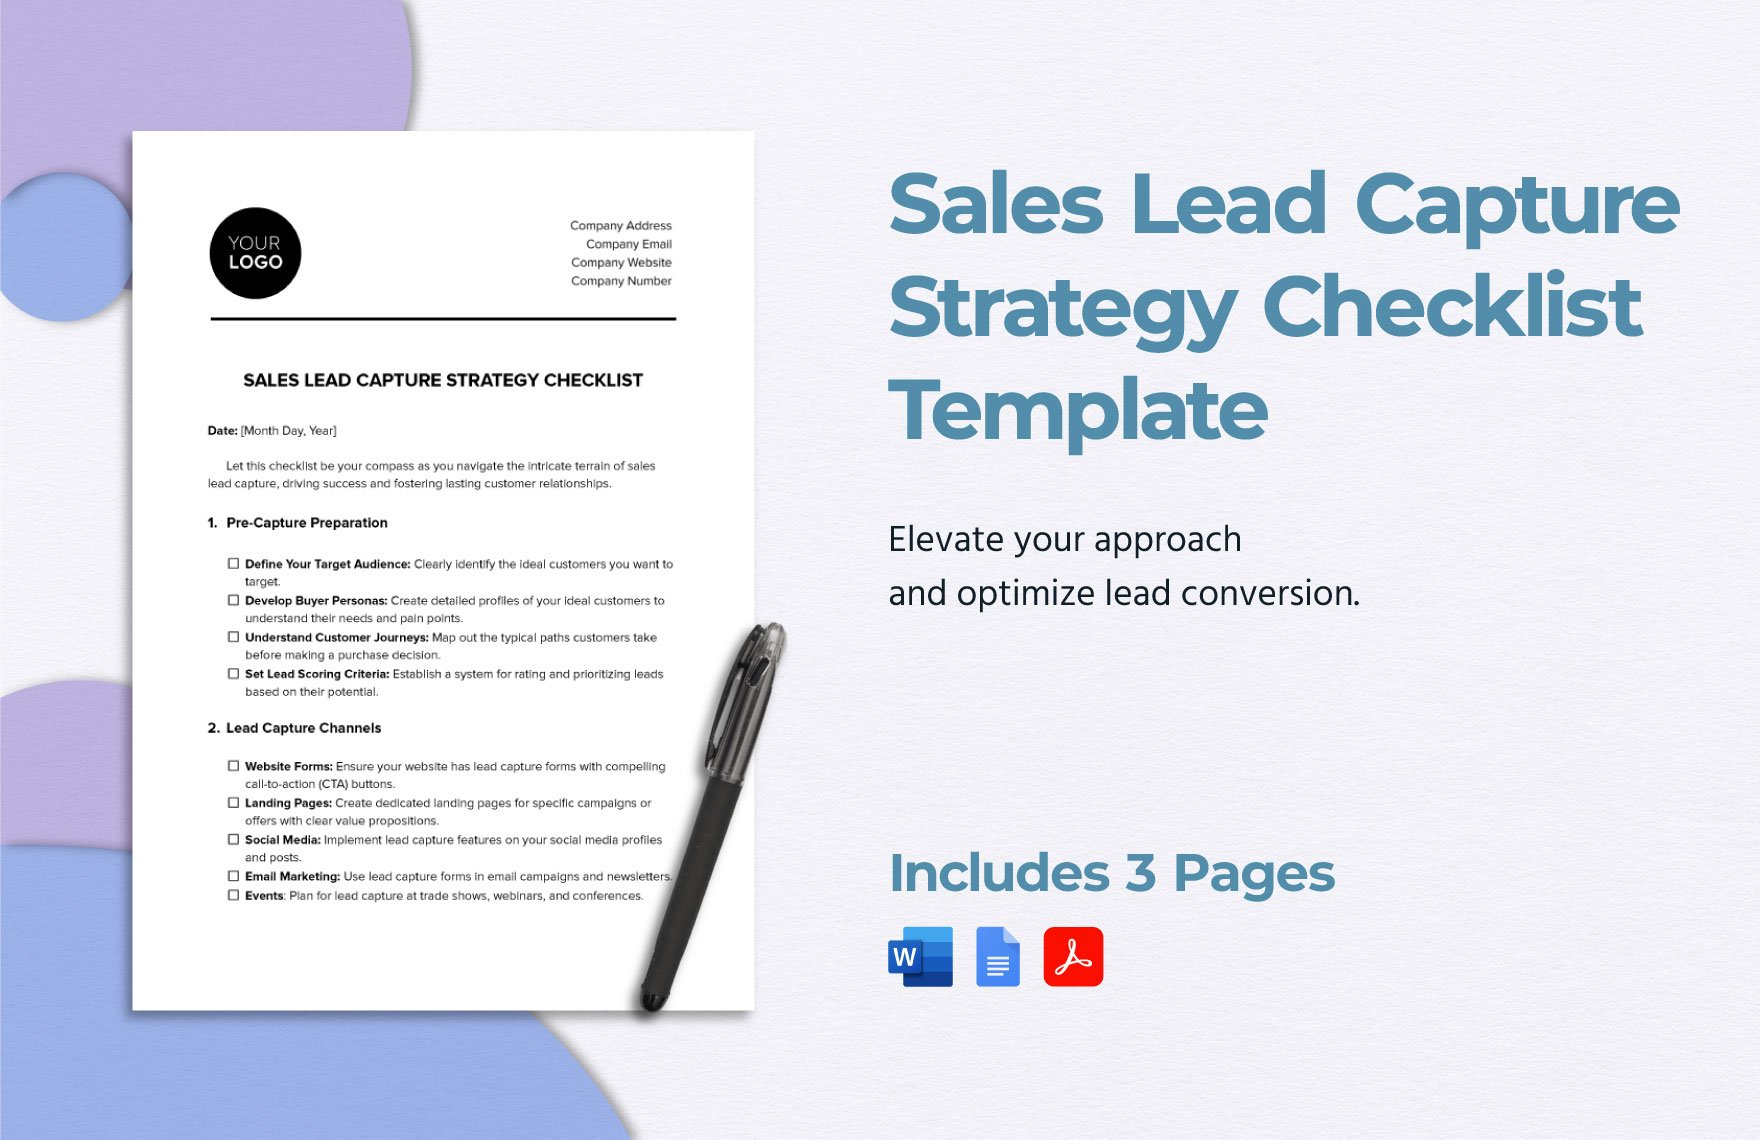 Sales Lead Capture Strategy Checklist Template